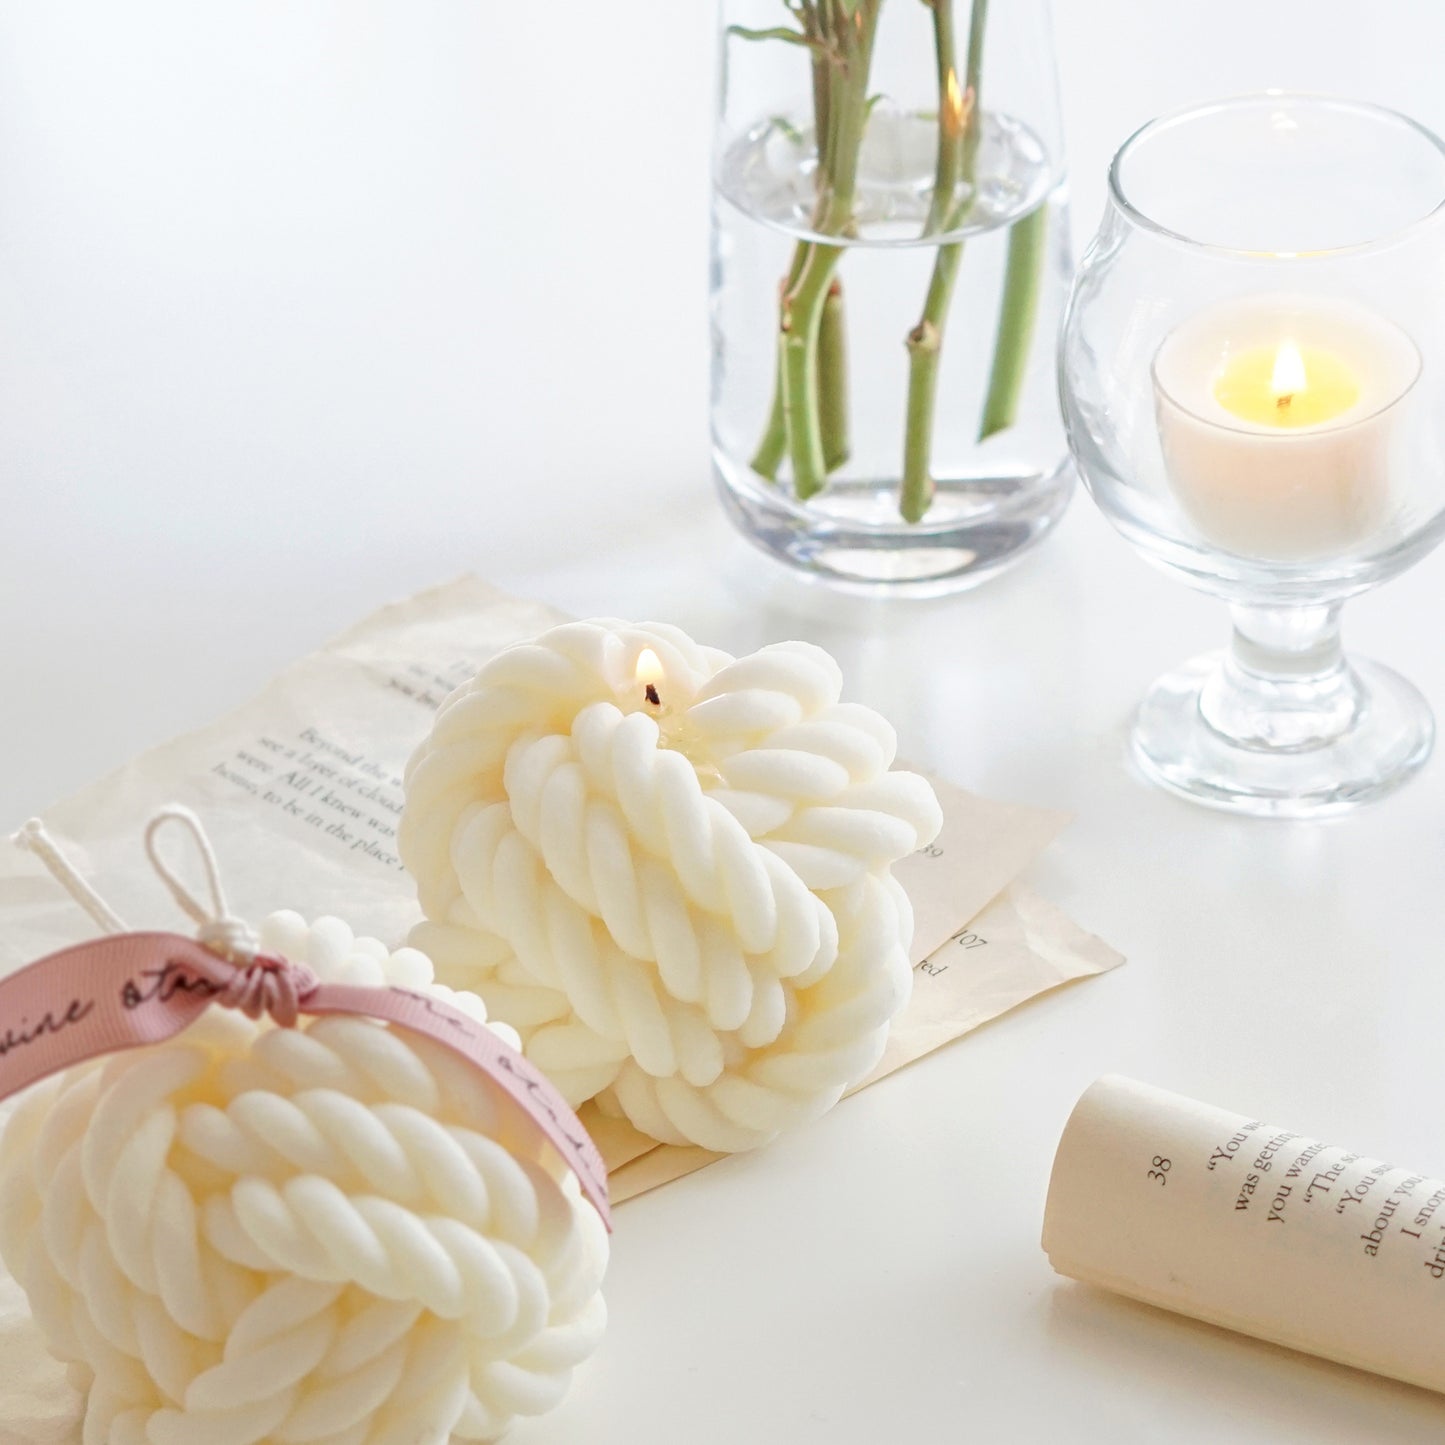 a lit yarn ball shape white soy pillar candle, another yarn candle with pink bluewine studio ribbon, rolled book pages, and a lit tealight candle in a mini glass